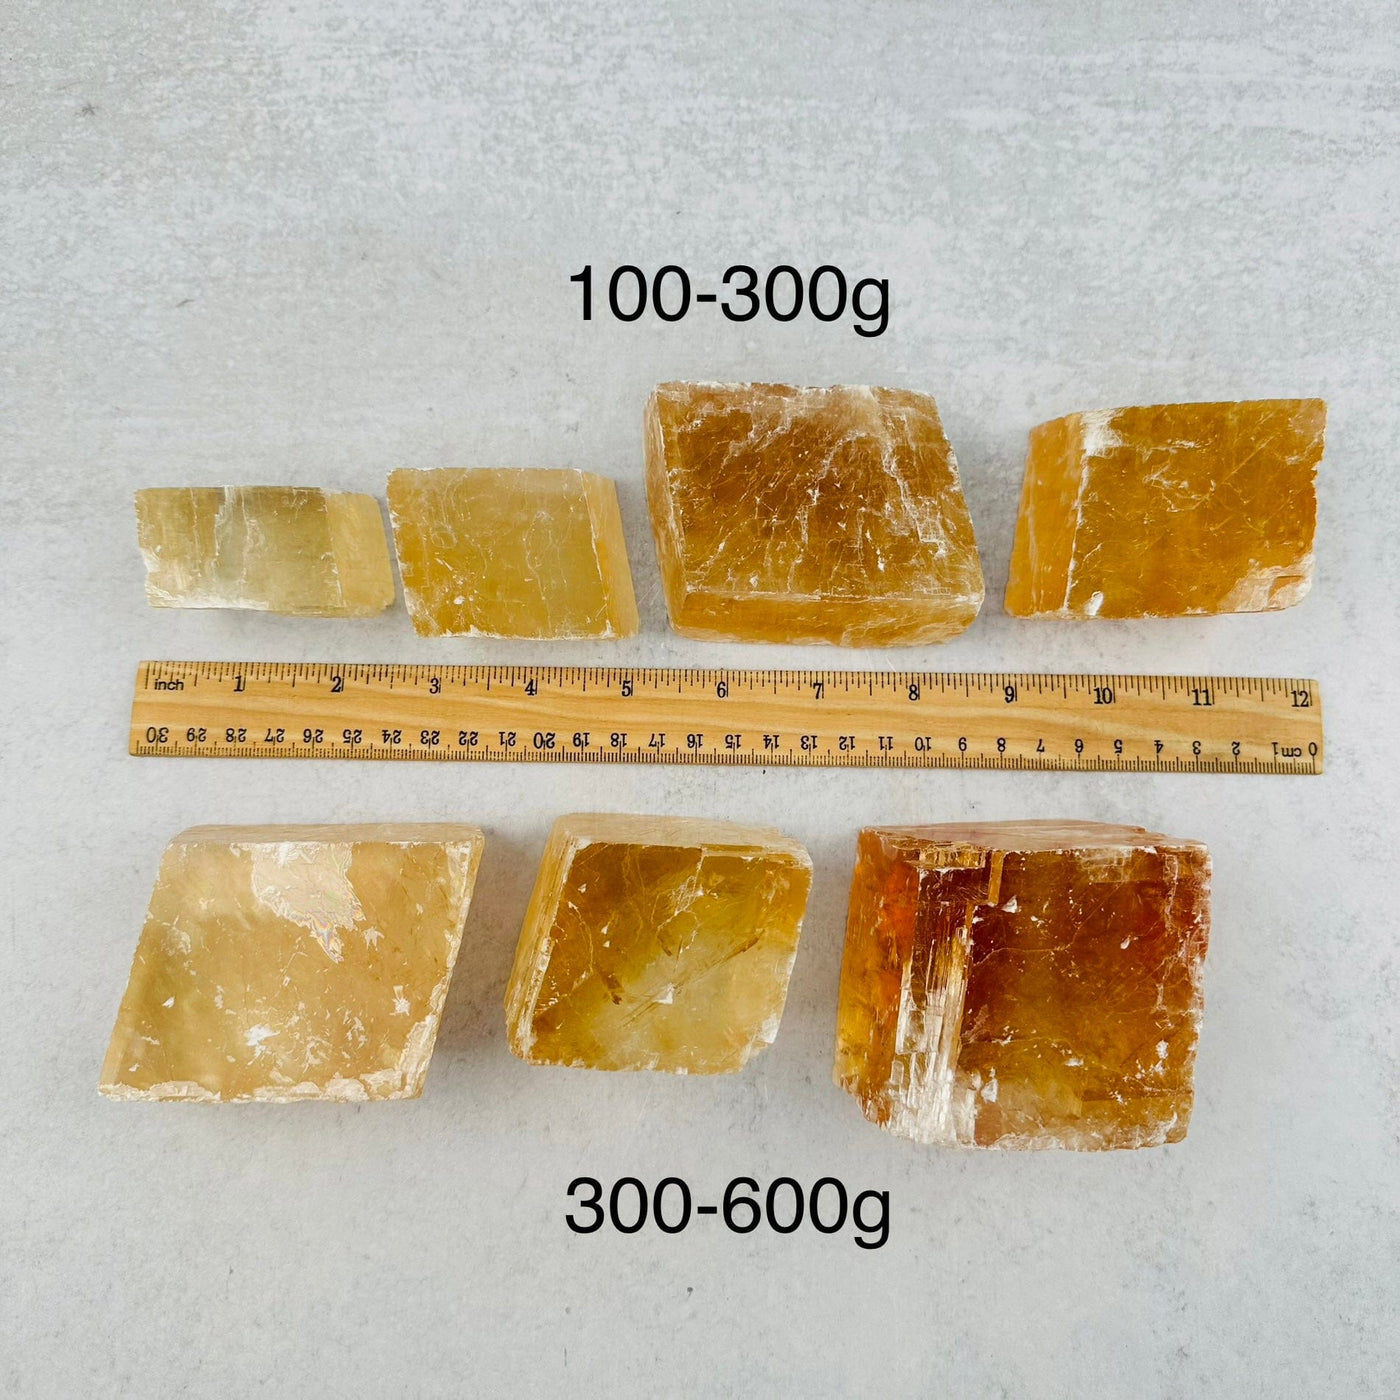 Yellow Optical Calcite - By Weight - next to a ruler for size reference 